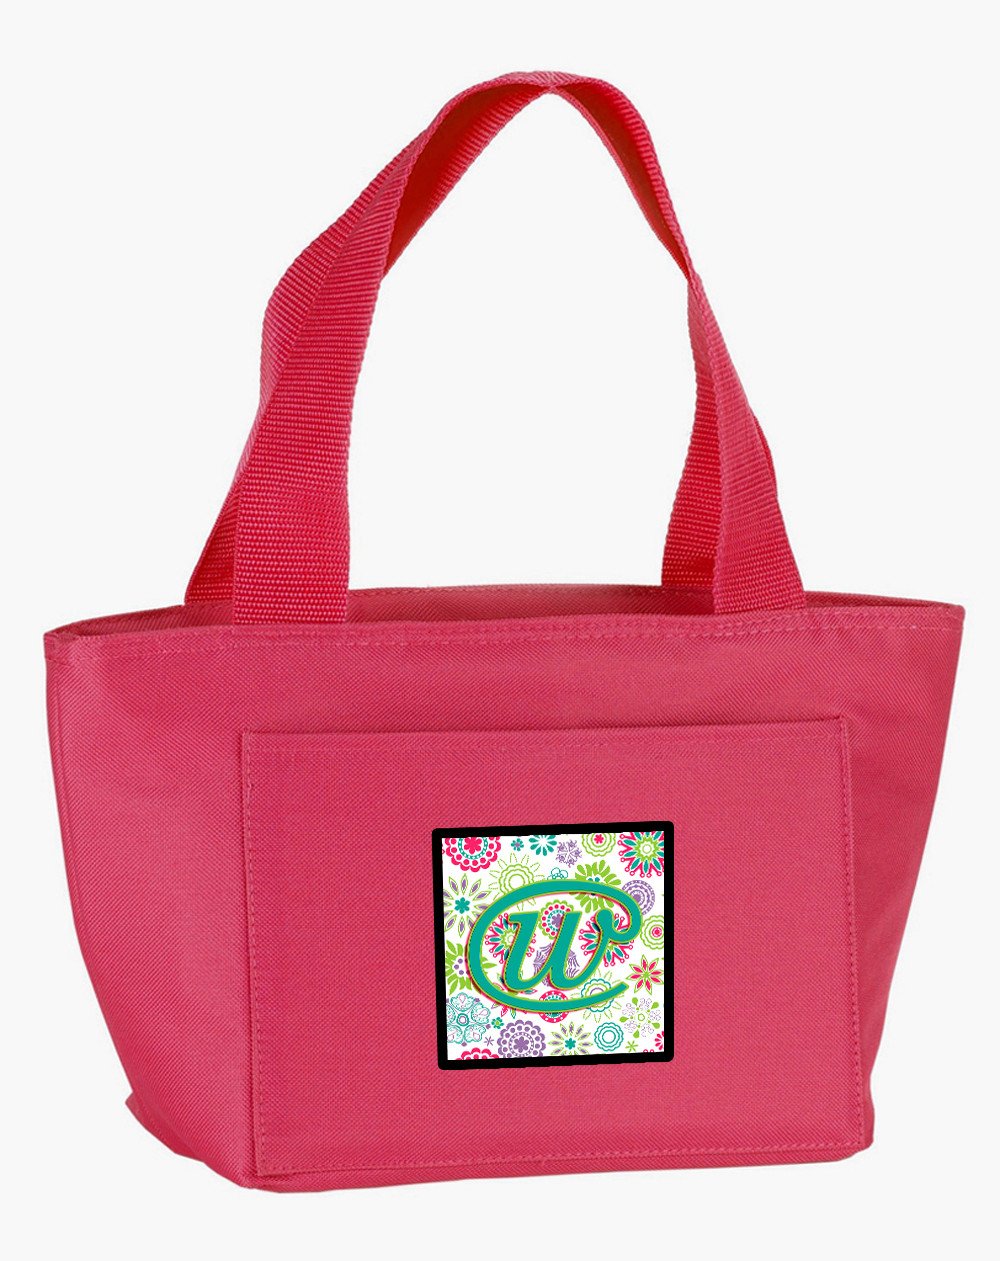 Letter W Flowers Pink Teal Green Initial Lunch Bag CJ2011-WPK-8808 by Caroline's Treasures